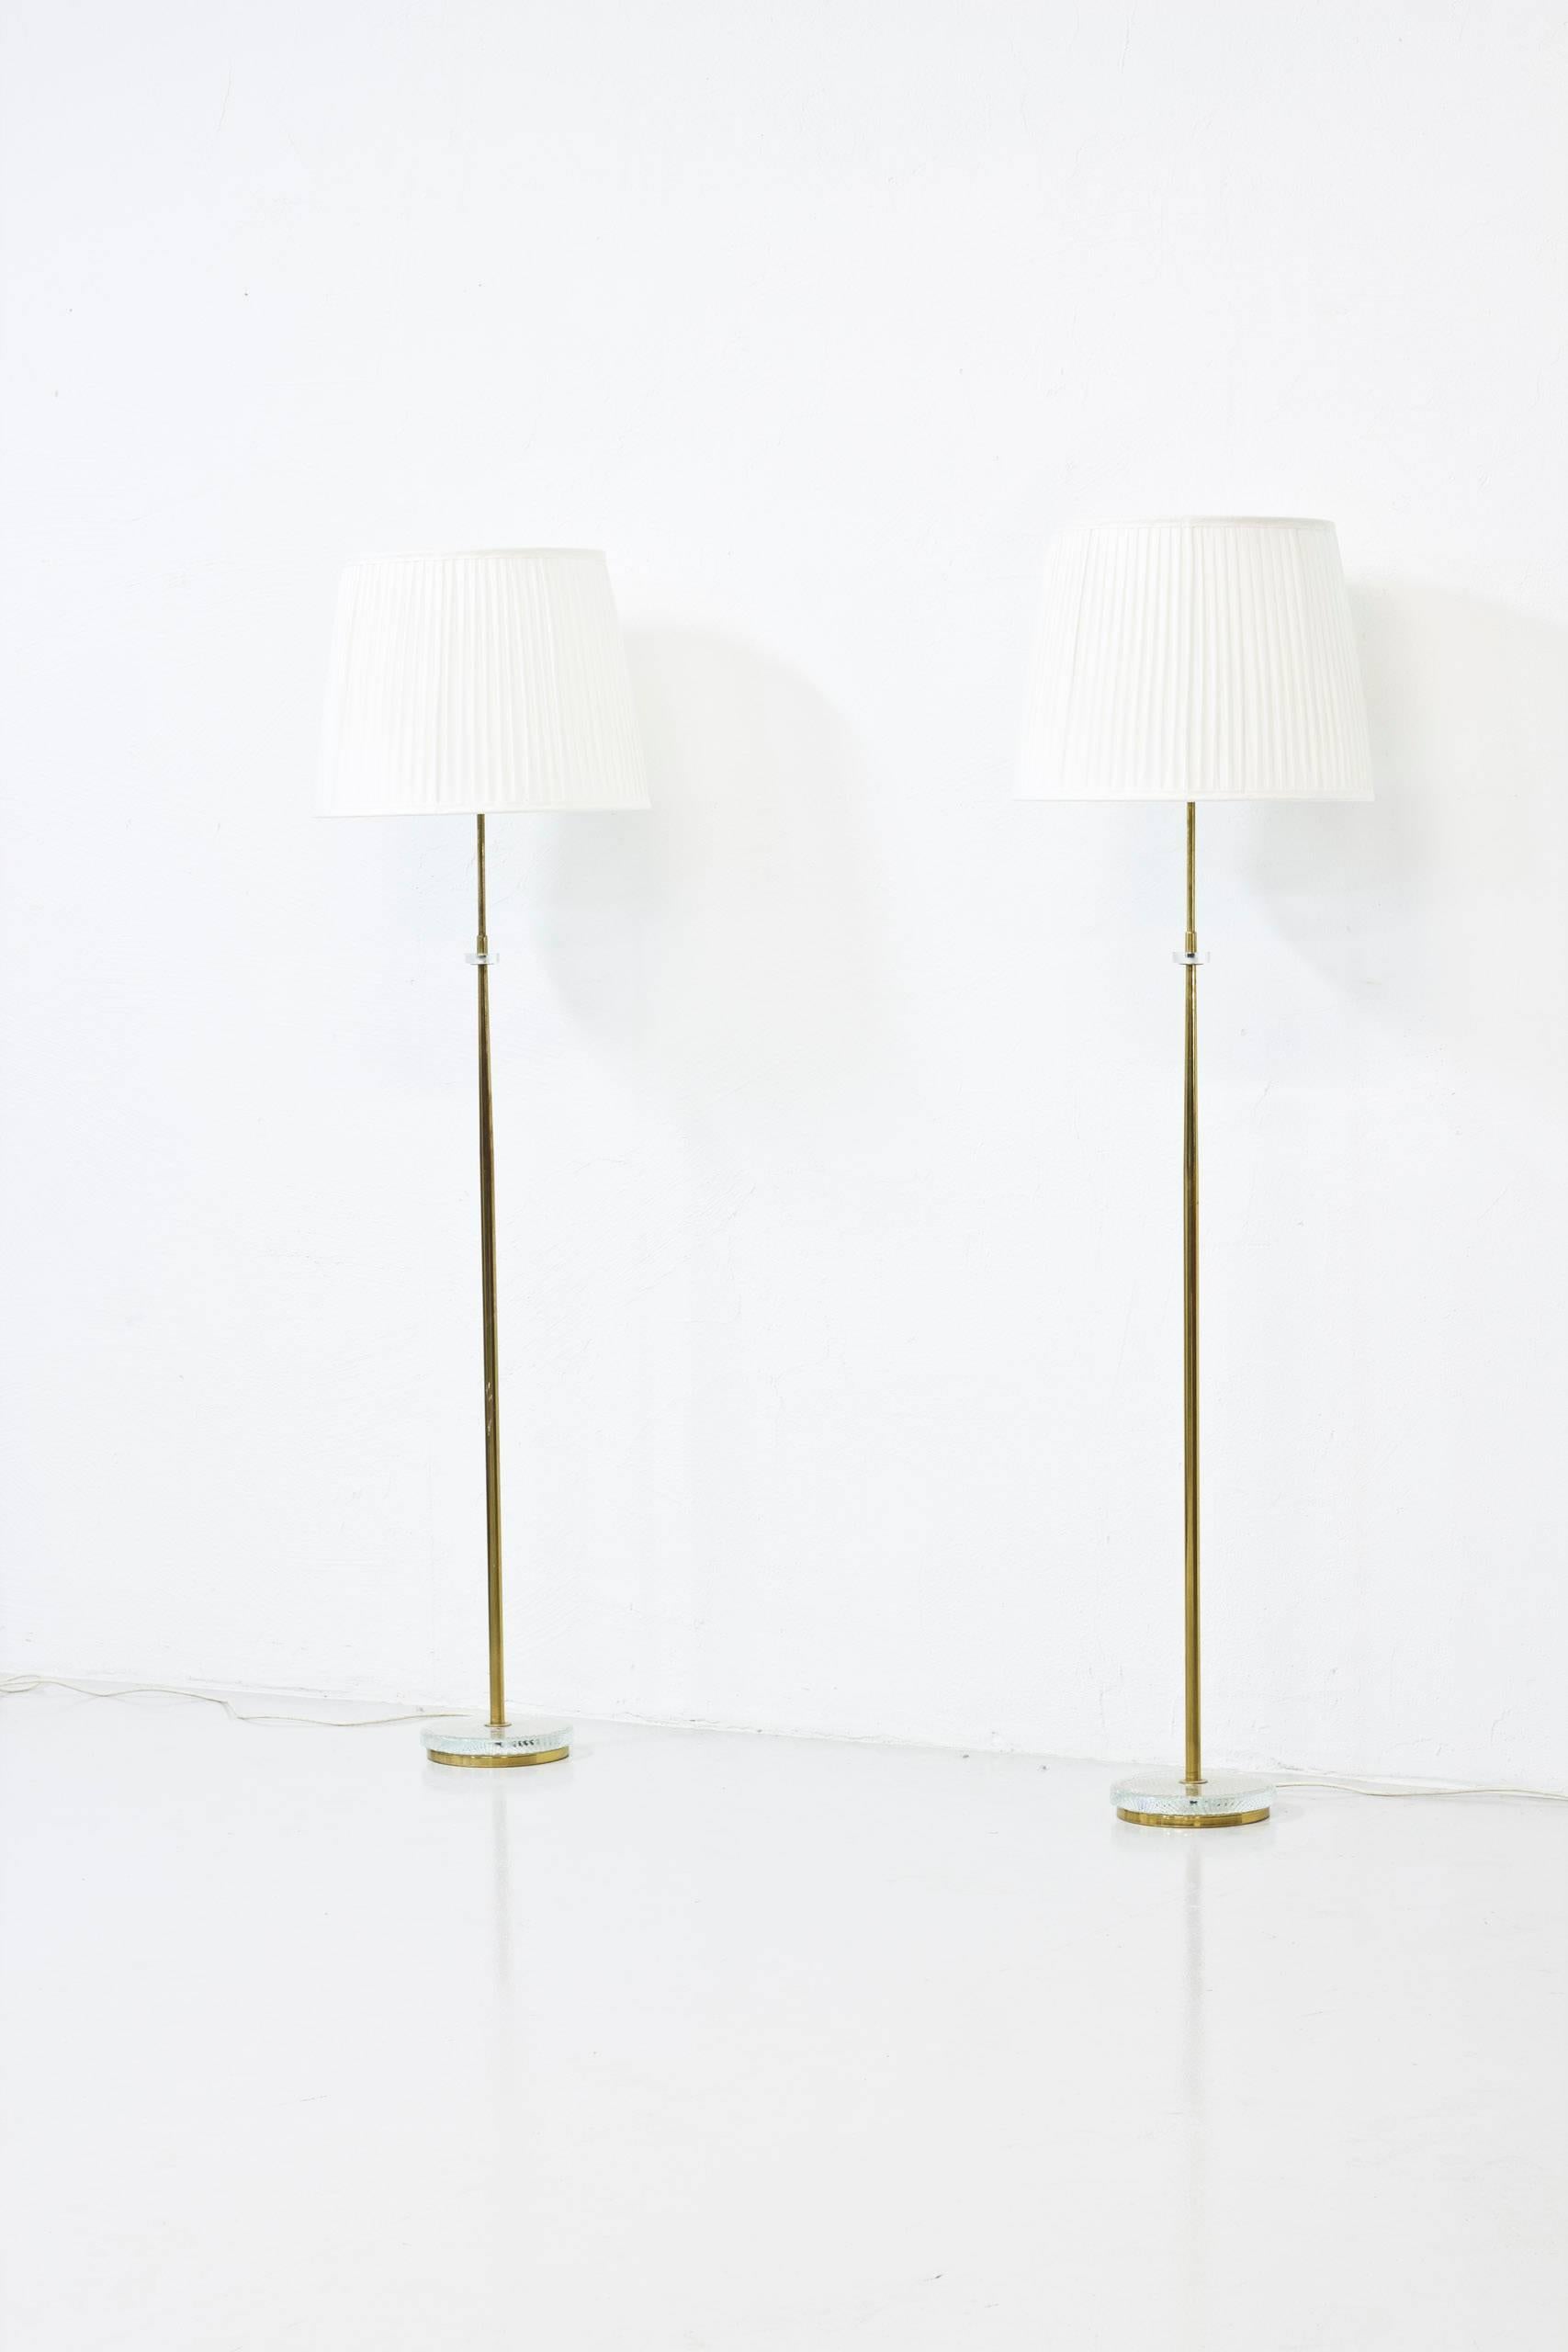 Pair of floor lamps in polished brass with clear glass details. New hand-sewn pleated silk shades. Produced in Sweden by CeBe during the 1960s. All original with light switch on the fixture in working condition. New electric cables. Excellent